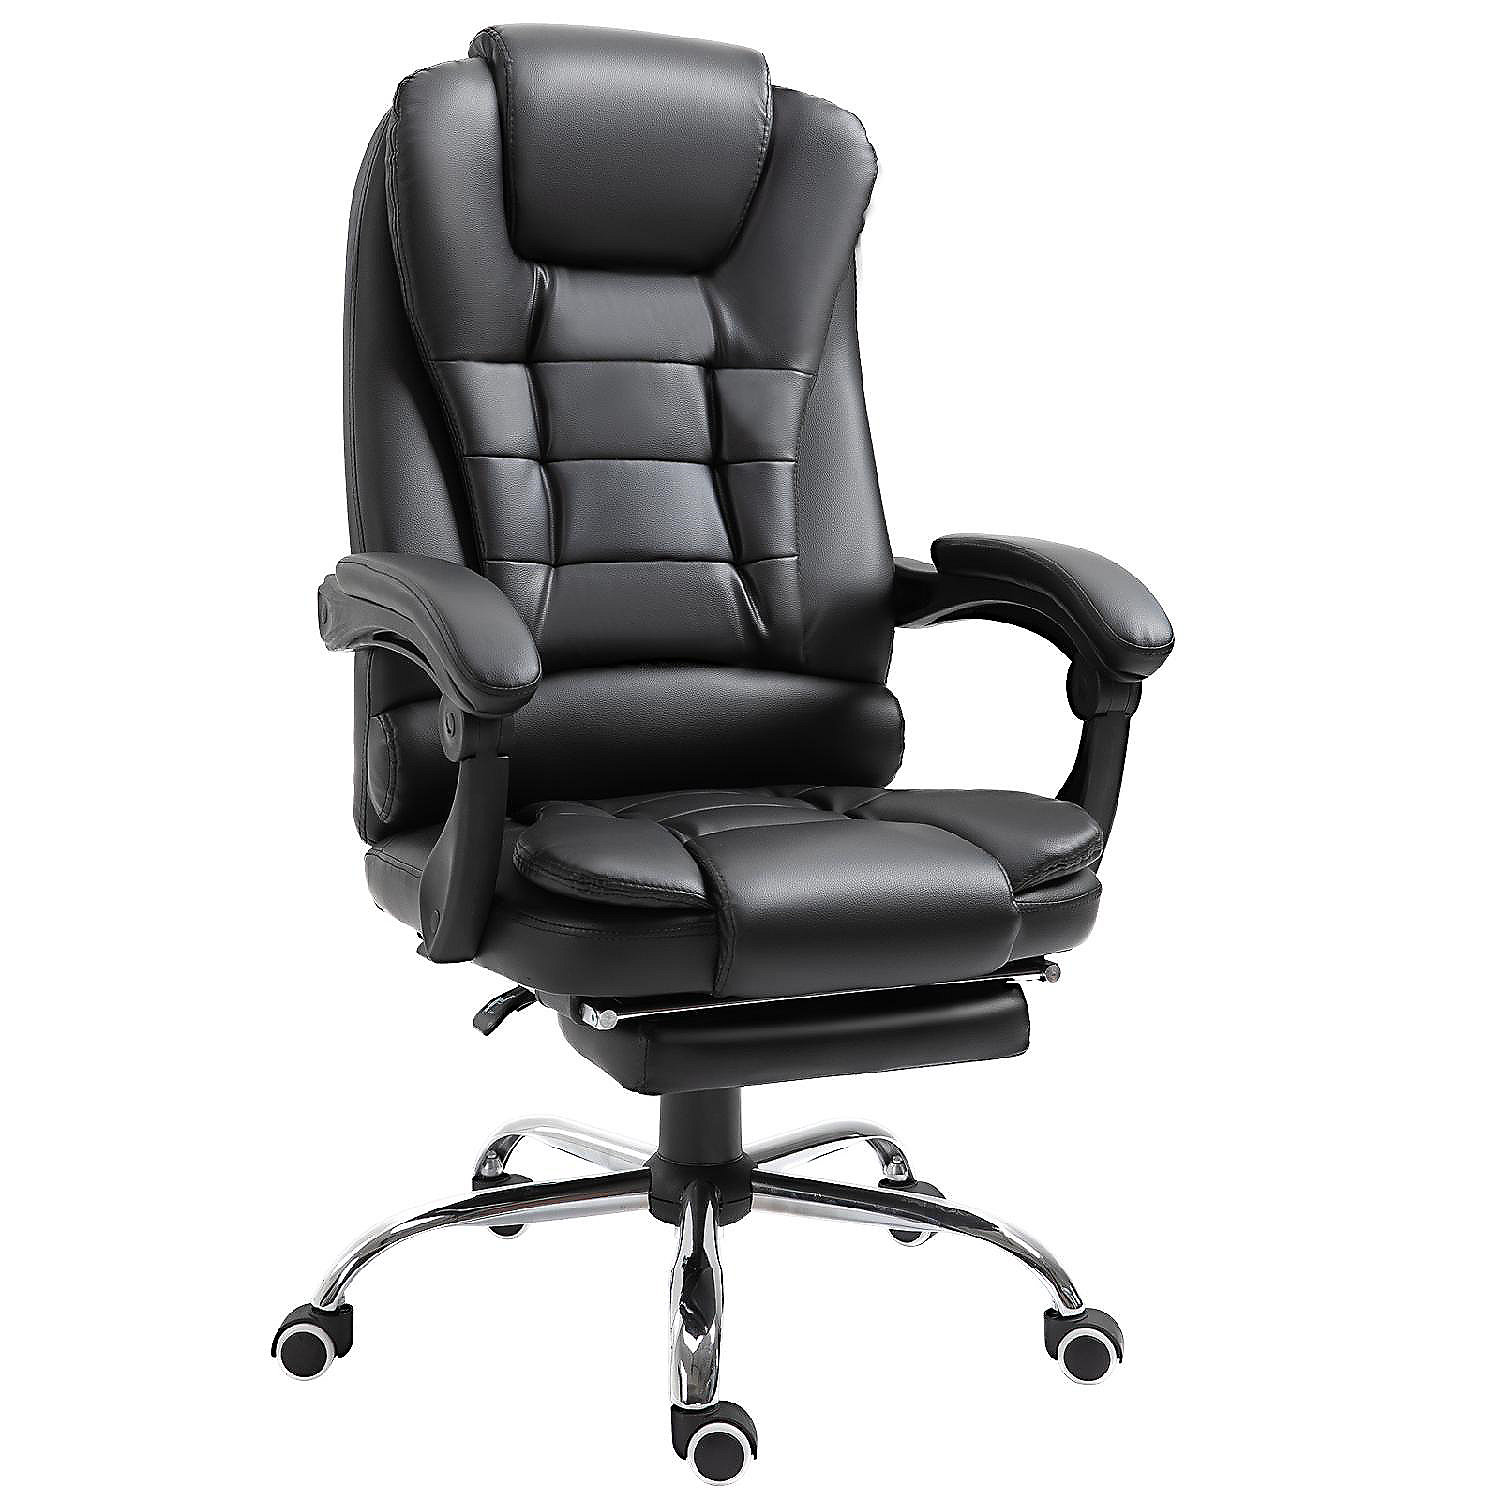 Homcom High Back Ergonomic Executive Office Chair Pu Leather Computer Chair With Retractable Footrest Lumbar Support Padded Headrest And Armrest Black~14225436$NOWA$